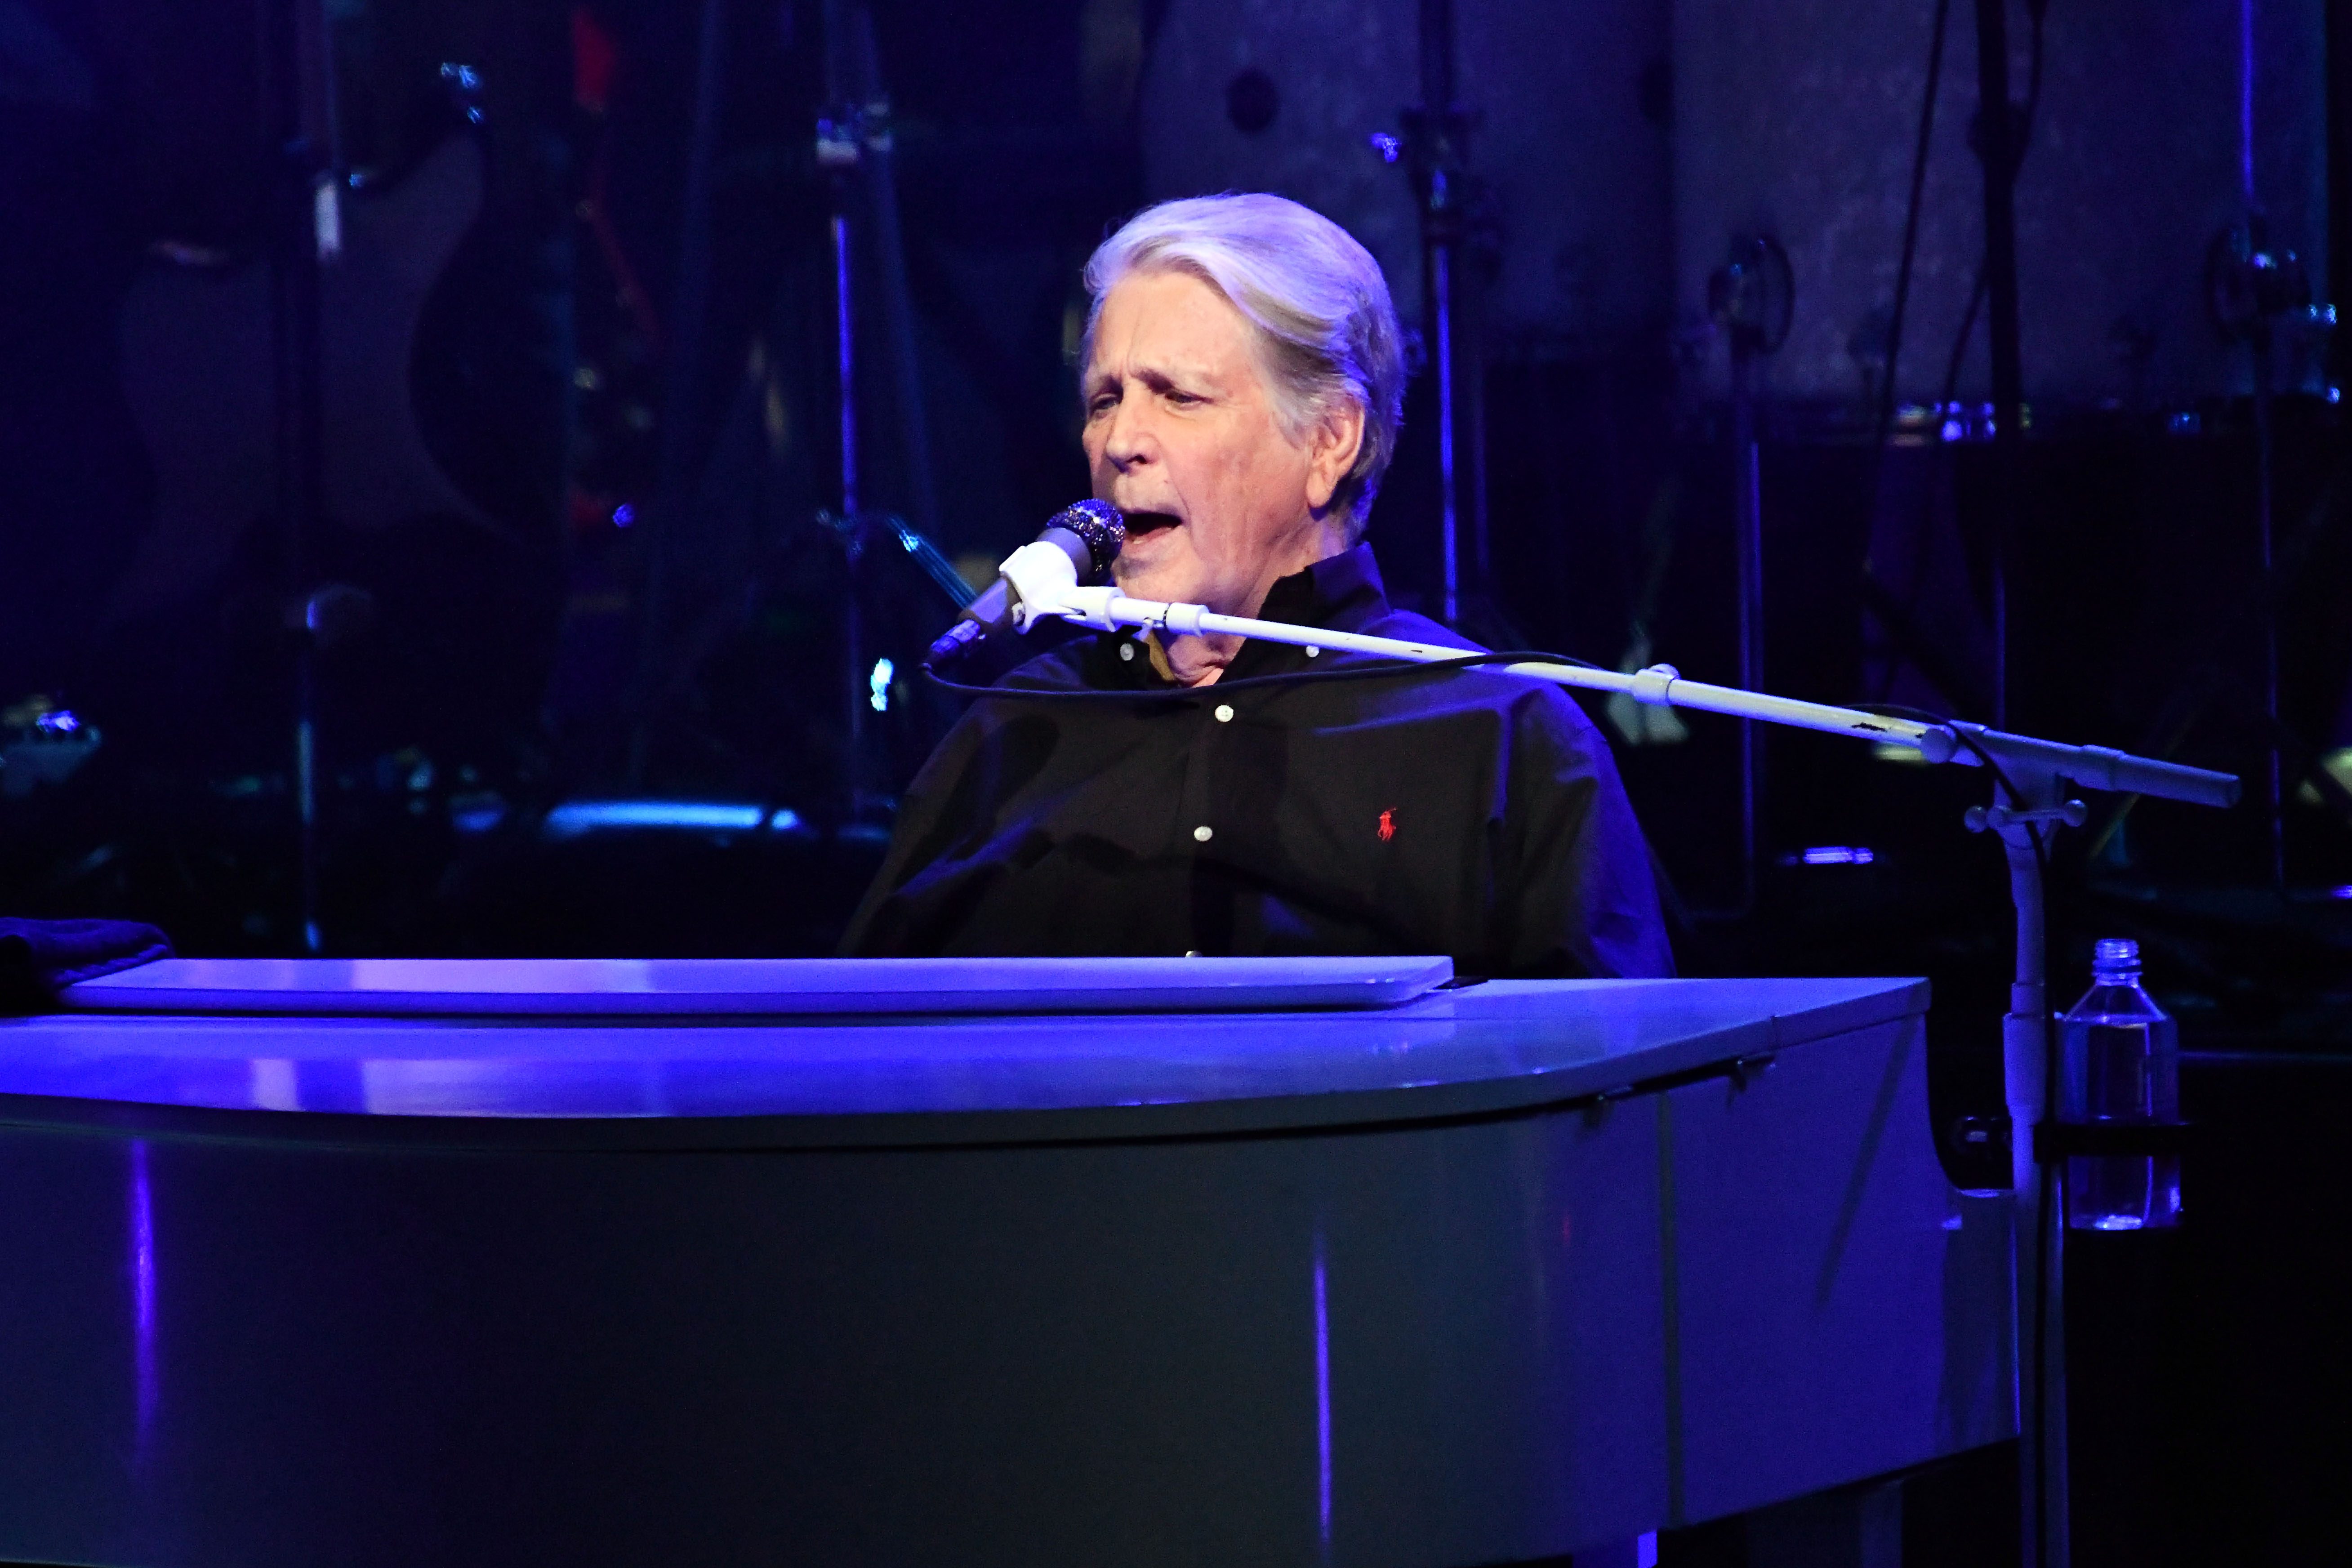 Brian Wilson performs onstage during the Something Great from '68 Tour at The Greek Theatre on September 12, 2019 in Los Angeles, California.